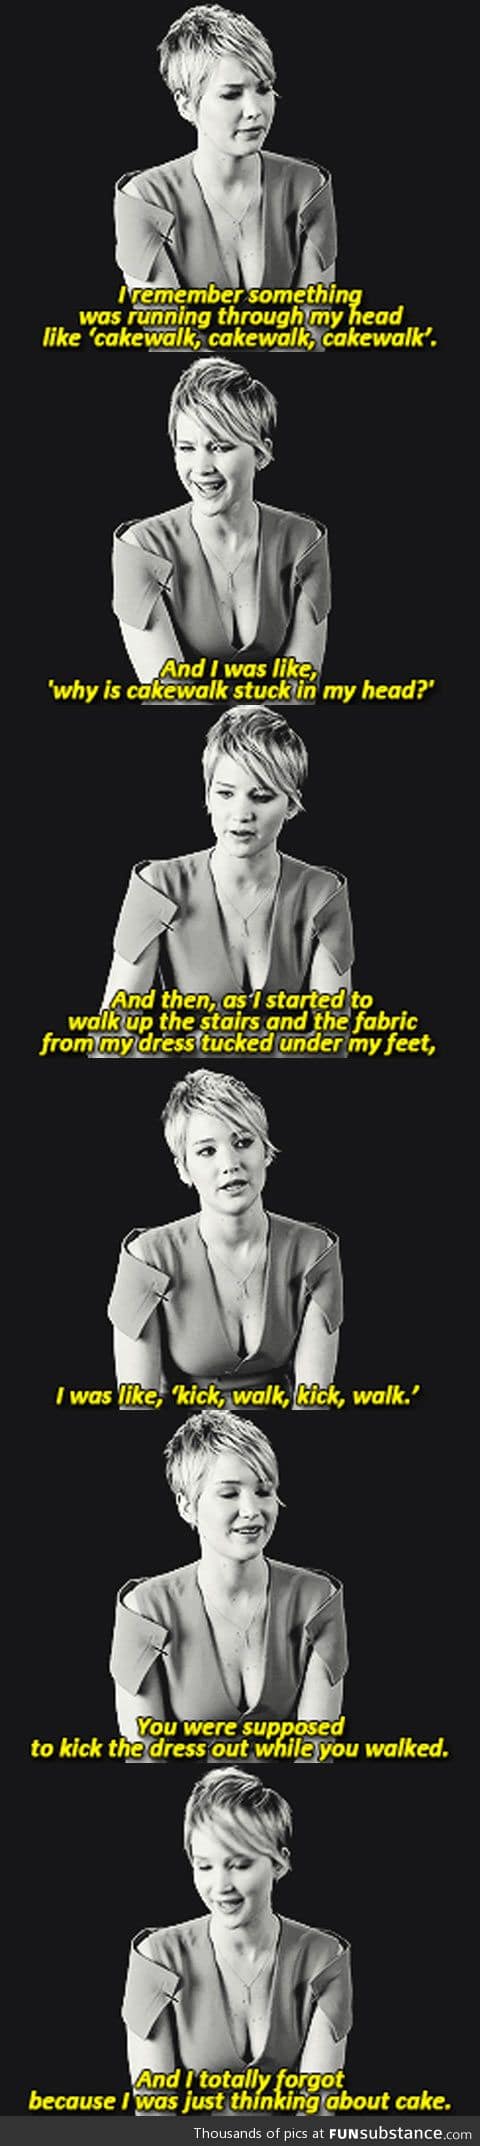 Jennifer Lawrence talks about her fall at the Oscars